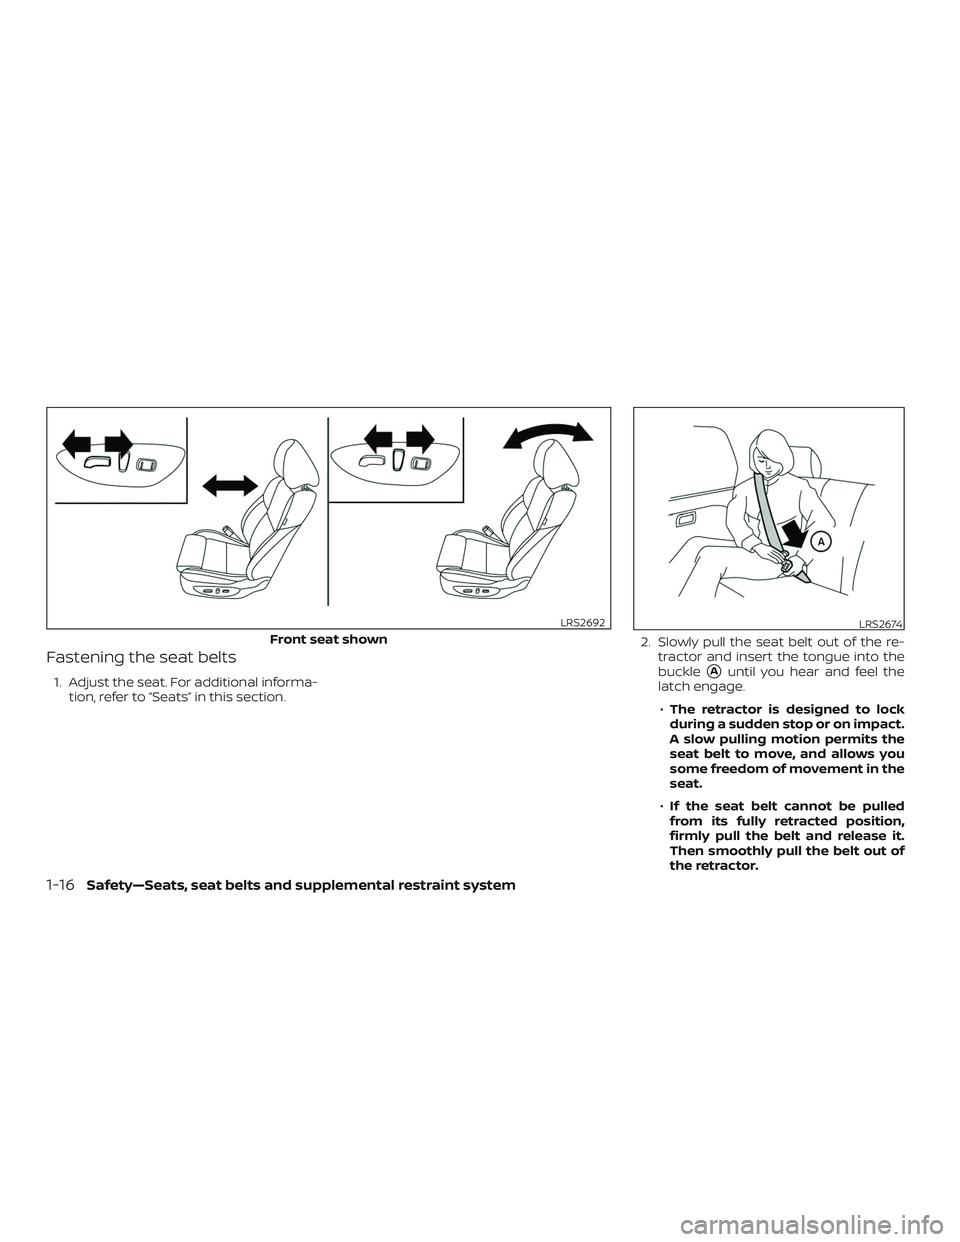 NISSAN MAXIMA 2019  Owner´s Manual Fastening the seat belts
1. Adjust the seat. For additional informa-tion, refer to “Seats” in this section. 2. Slowly pull the seat belt out of the re-
tractor and insert the tongue into the
buckl